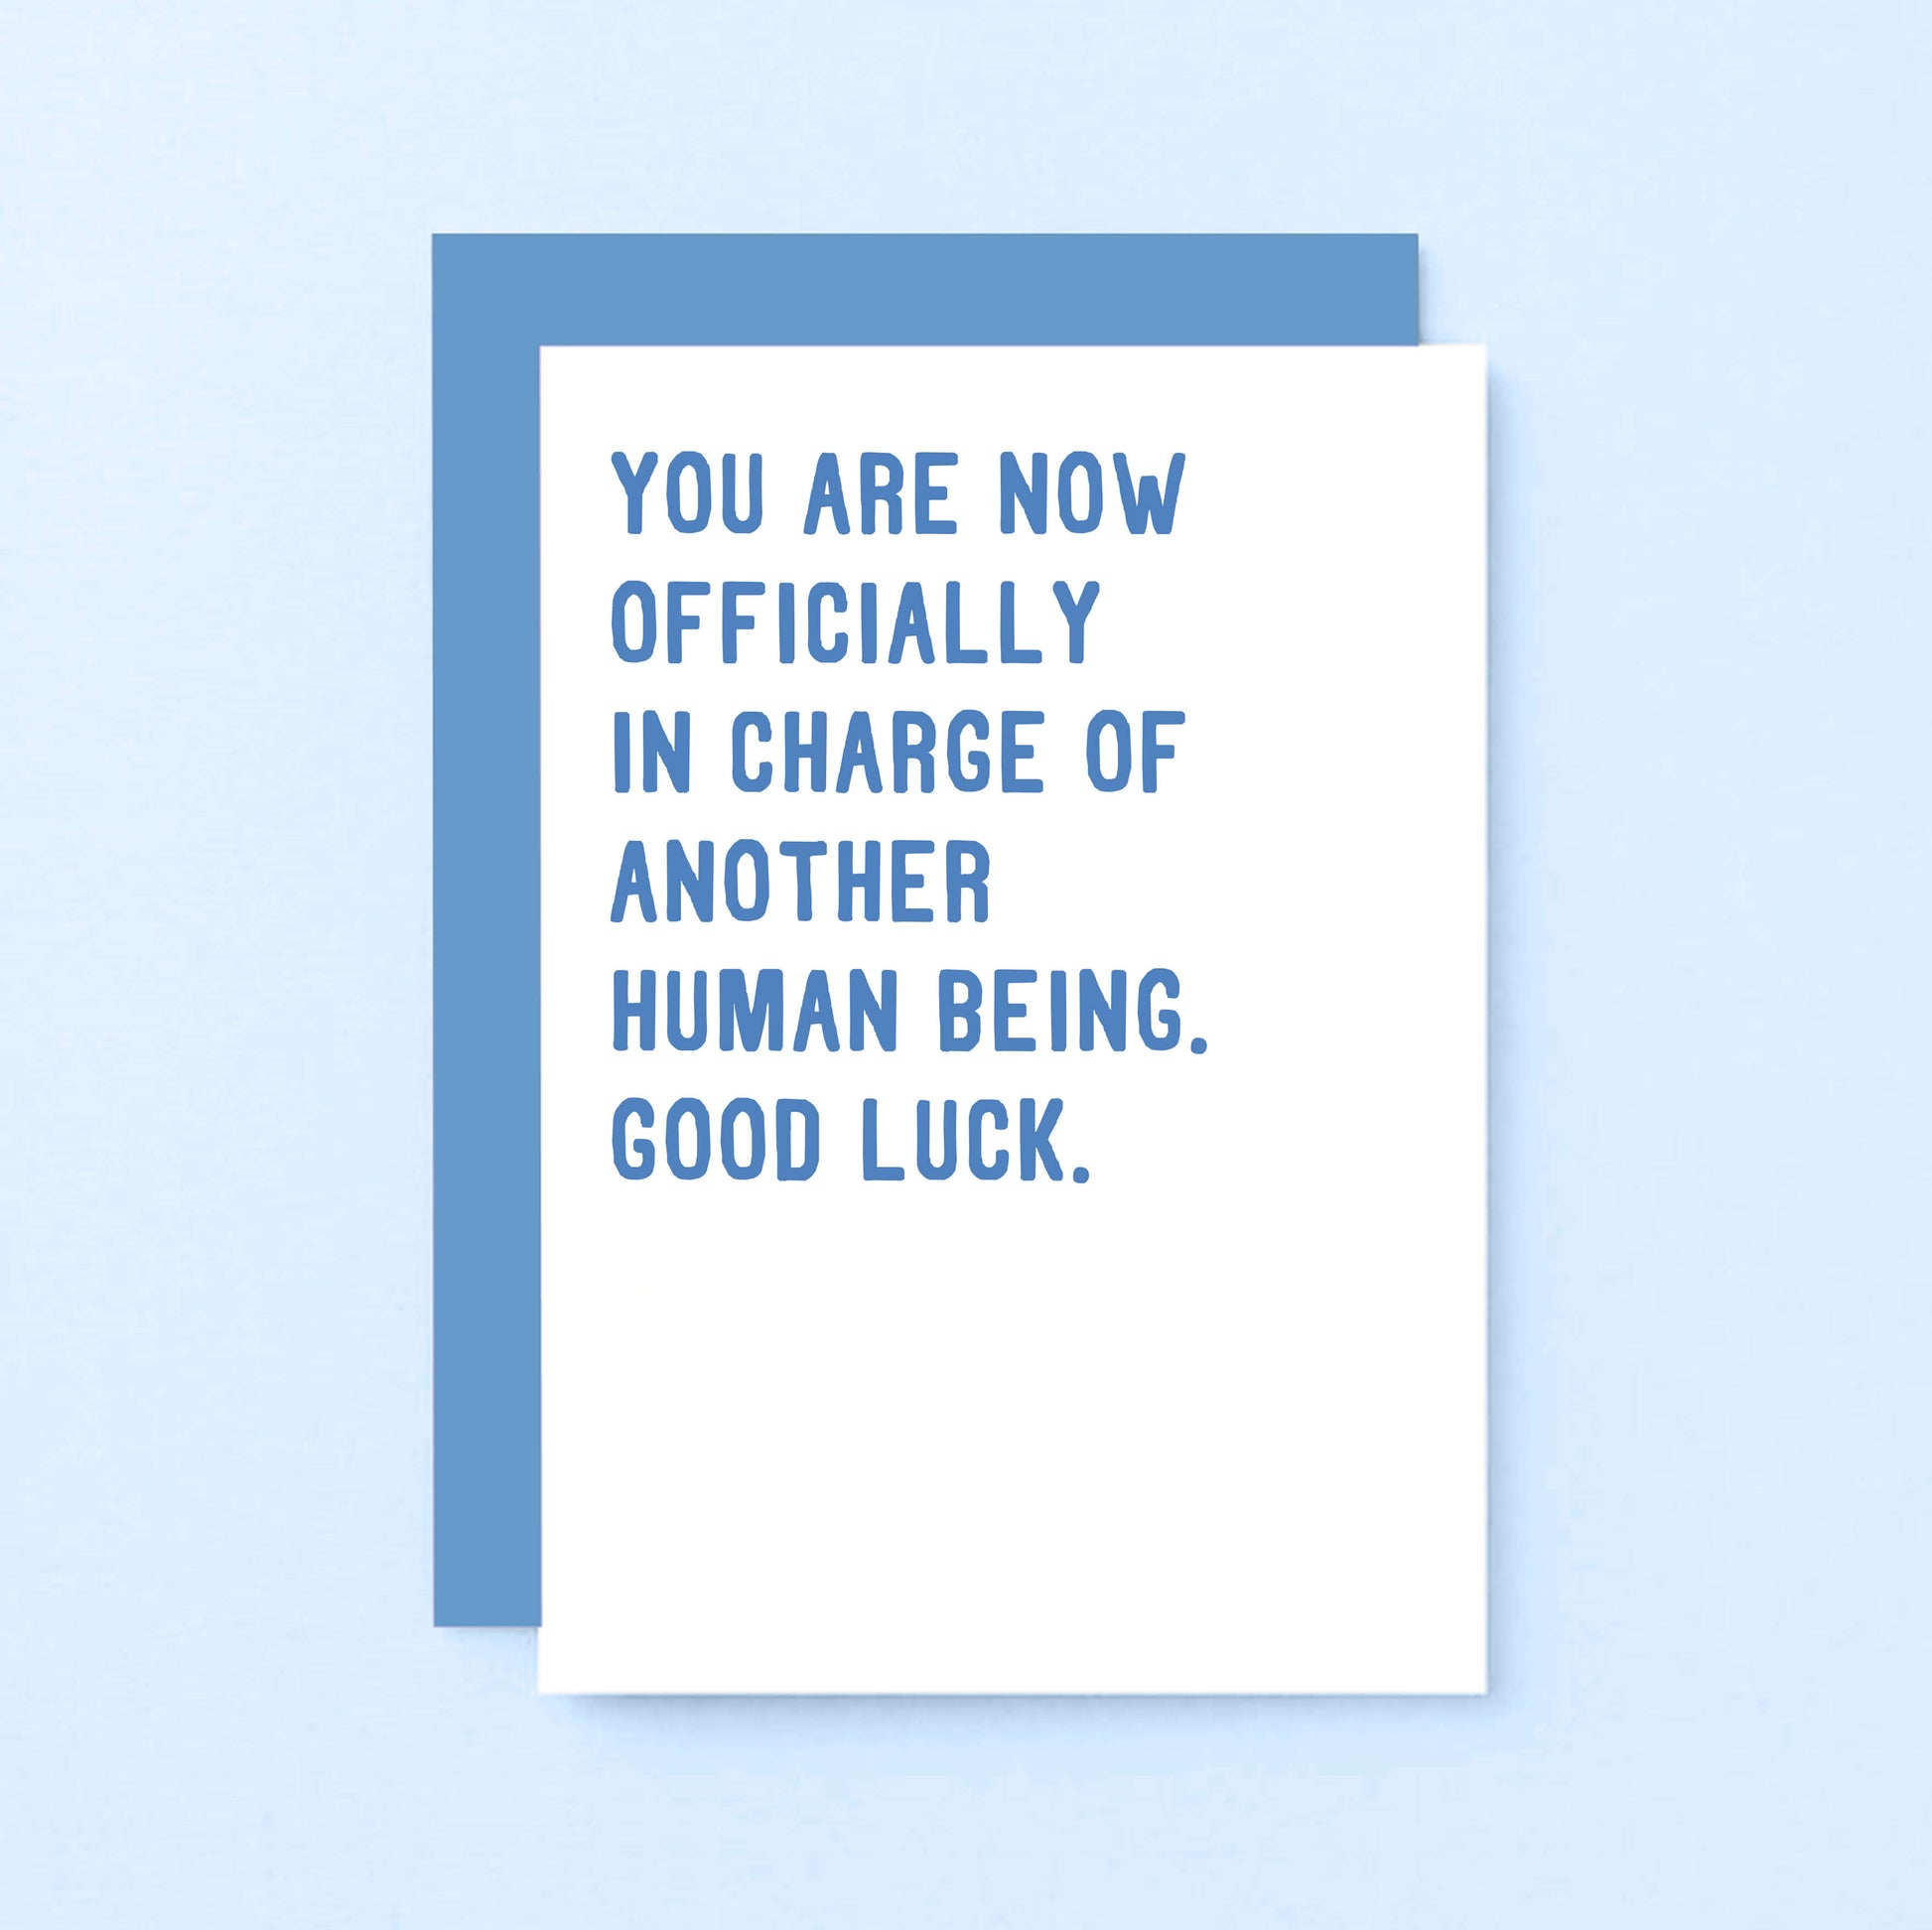 New Baby Card by SixElevenCreations. Reads You are now officially in charge of another human being. Good luck. Product Code SE2008A6